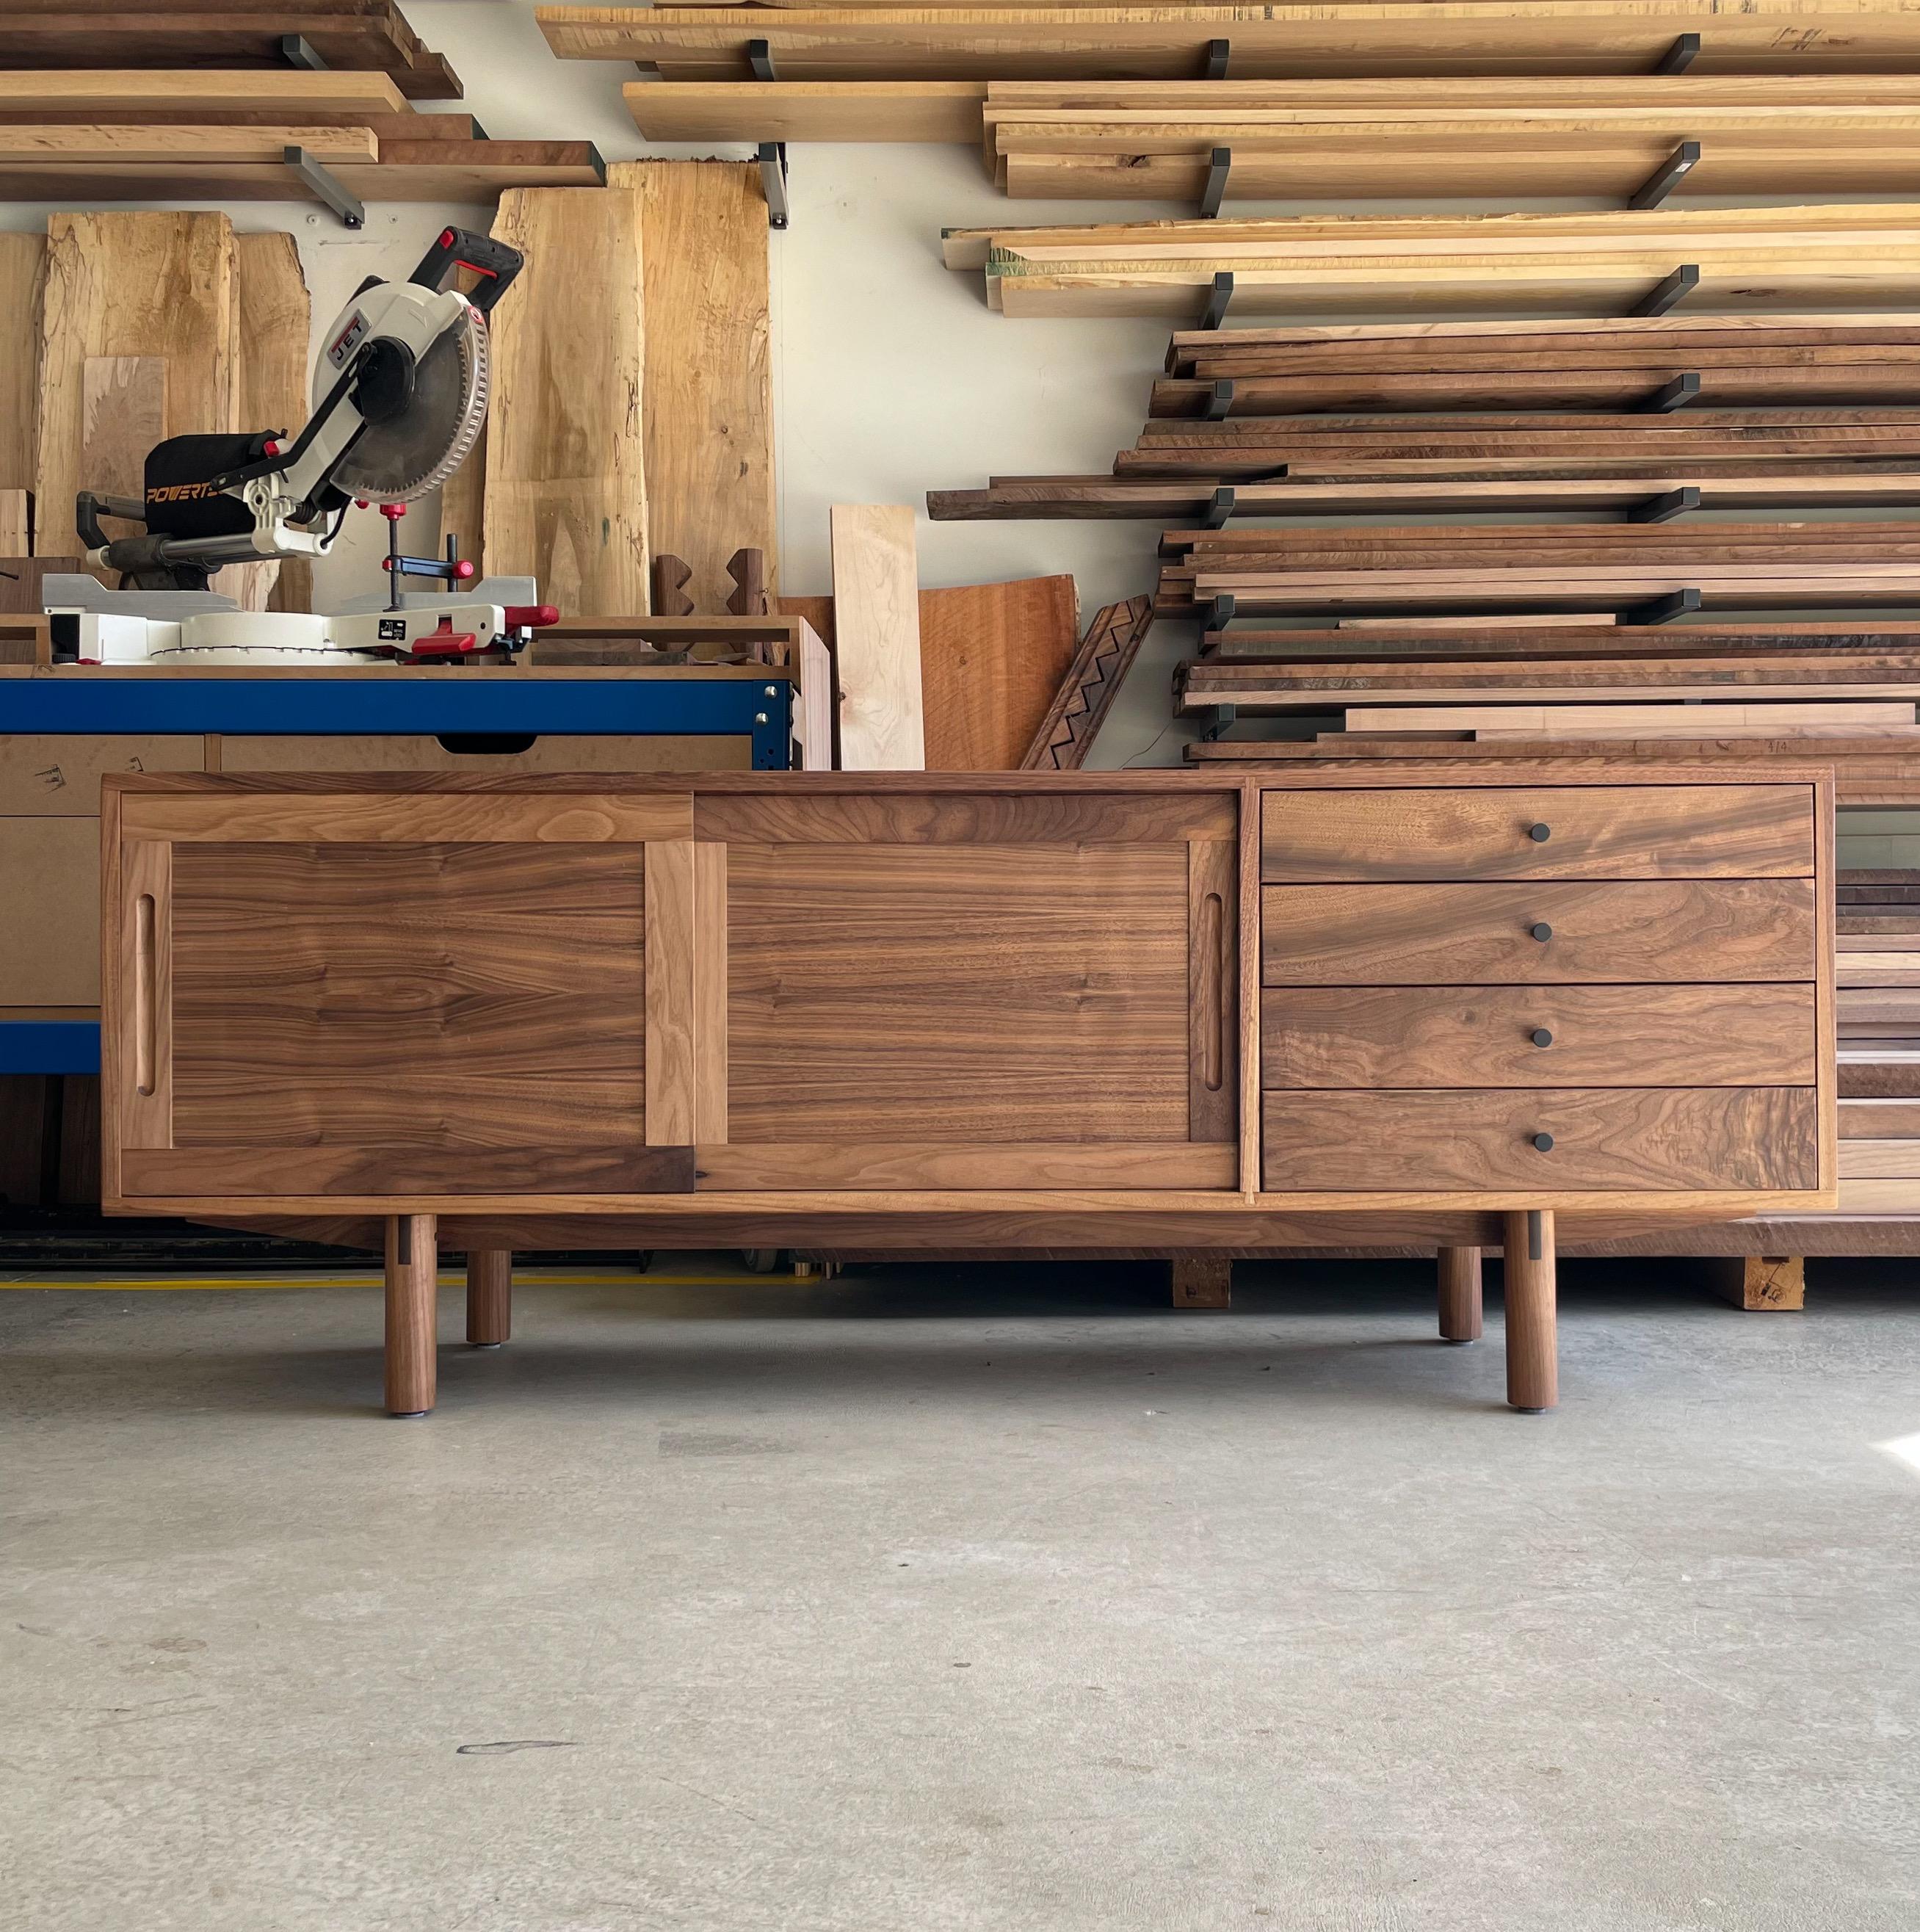 Sideboard No.5 is a highly detailed and functional cabinet featuring traditional joinery that has been lost in today's fast built, throw away furniture. Although there have been multiple made, no two are the same and are unique in their own way.